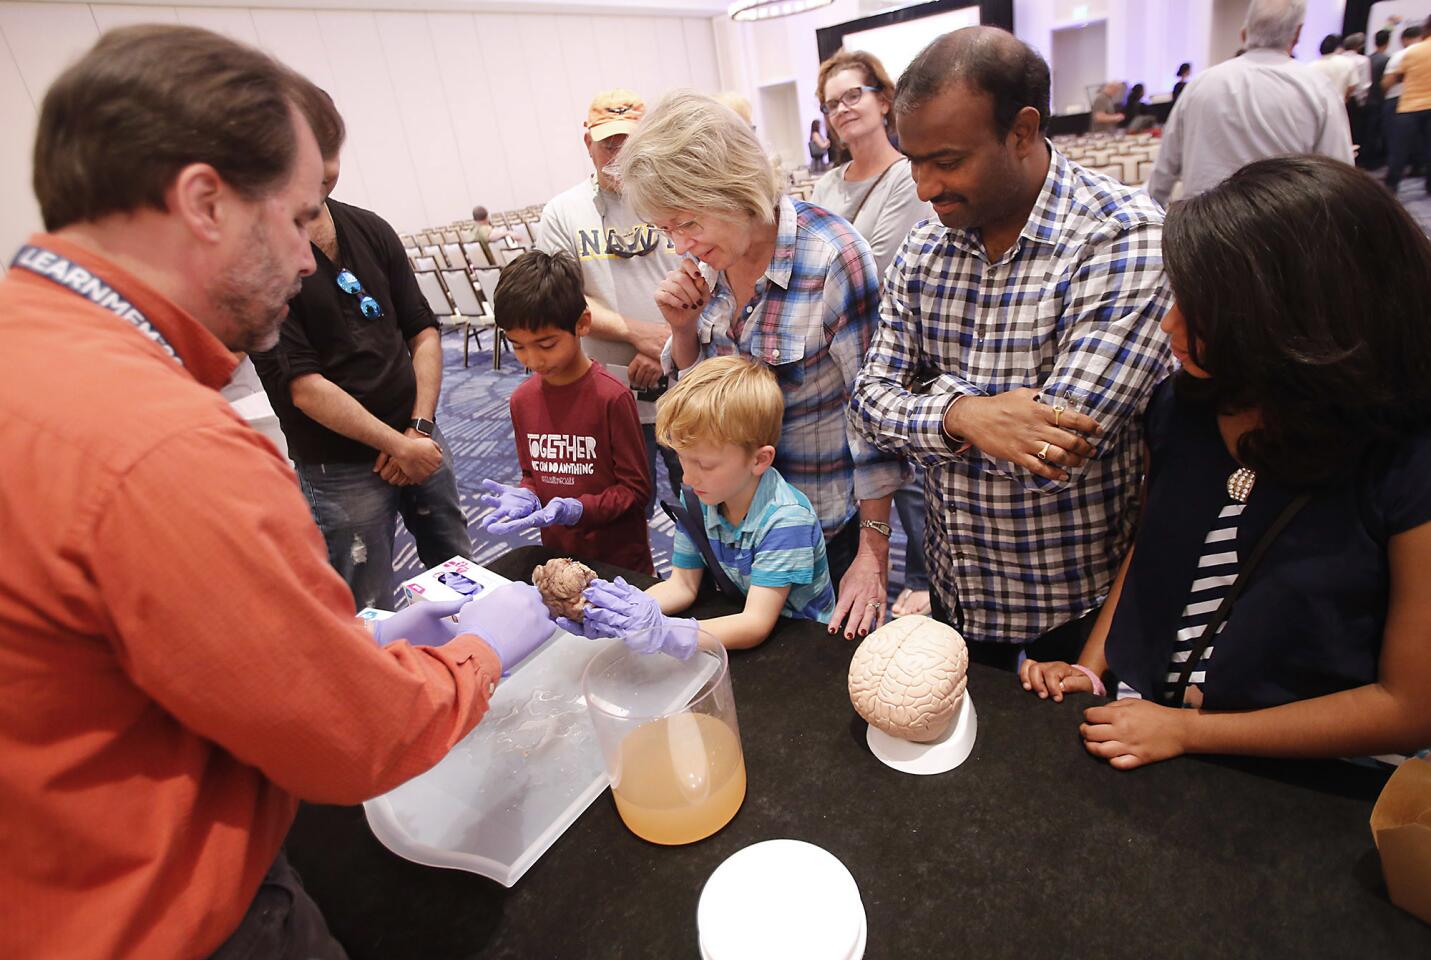 Caleb Goss, 7, with his grandmother Shirley Furman, gets a look at a real human brain Saturday during the International Conference on Learning and Memory at the Waterfront Beach Resort in Huntington Beach.